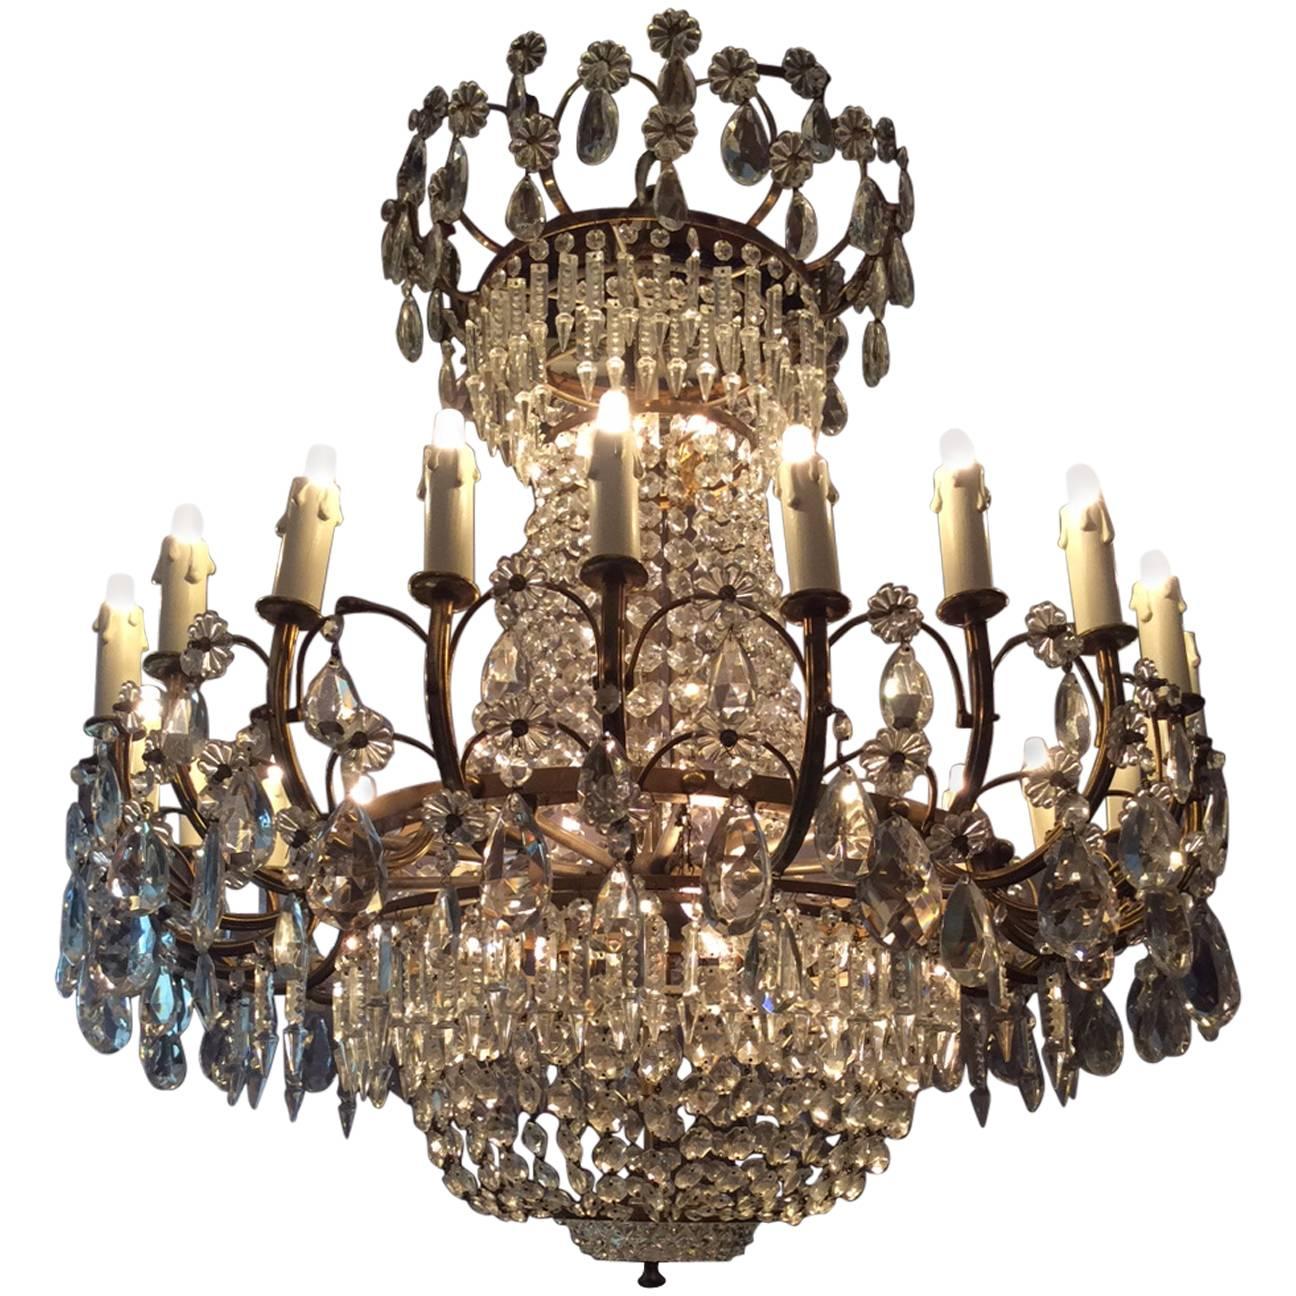 Crystal Chandelier with 24 Arms of Light, France, circa 1940